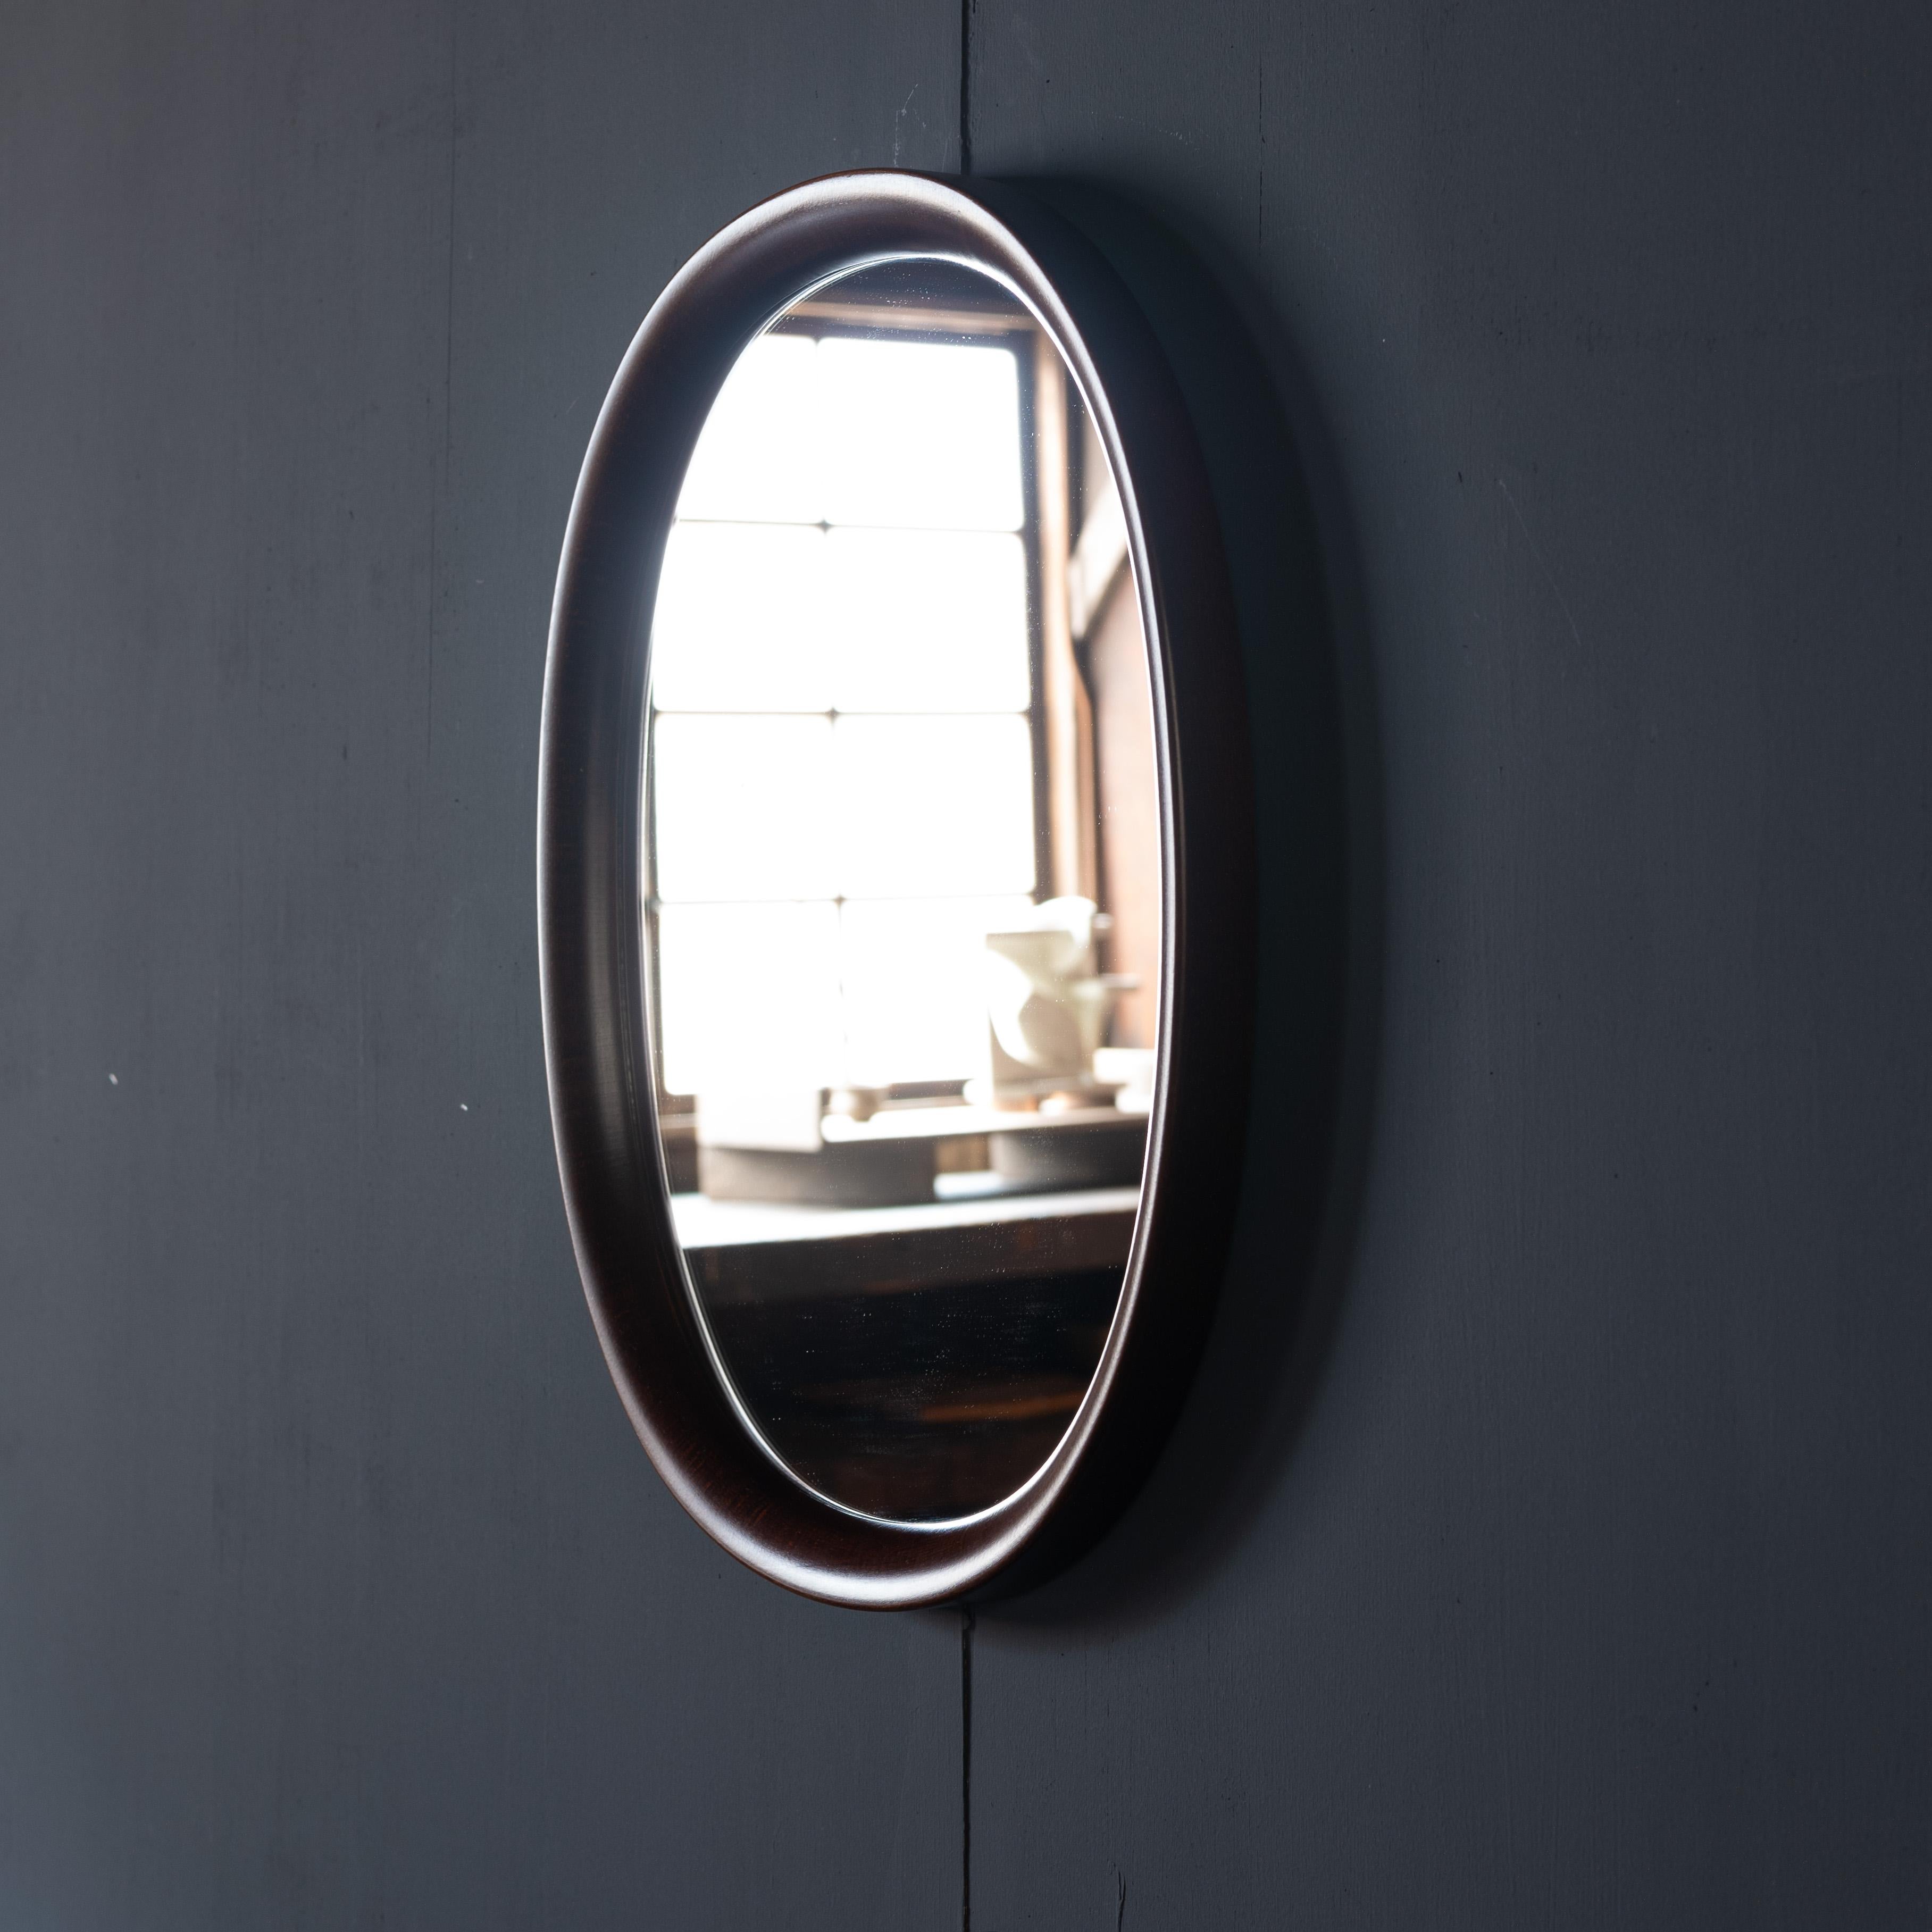 Wall hanging mirror that was designed by Sori Yanagi in 1977 and manufactured by Akita Mokko. There is only one seam in the frame, which shows Akita Mokko's excellent technique.

SORI YANAGI - was born in 1915 in Tokyo as a son of Soetsu Yanagi, a